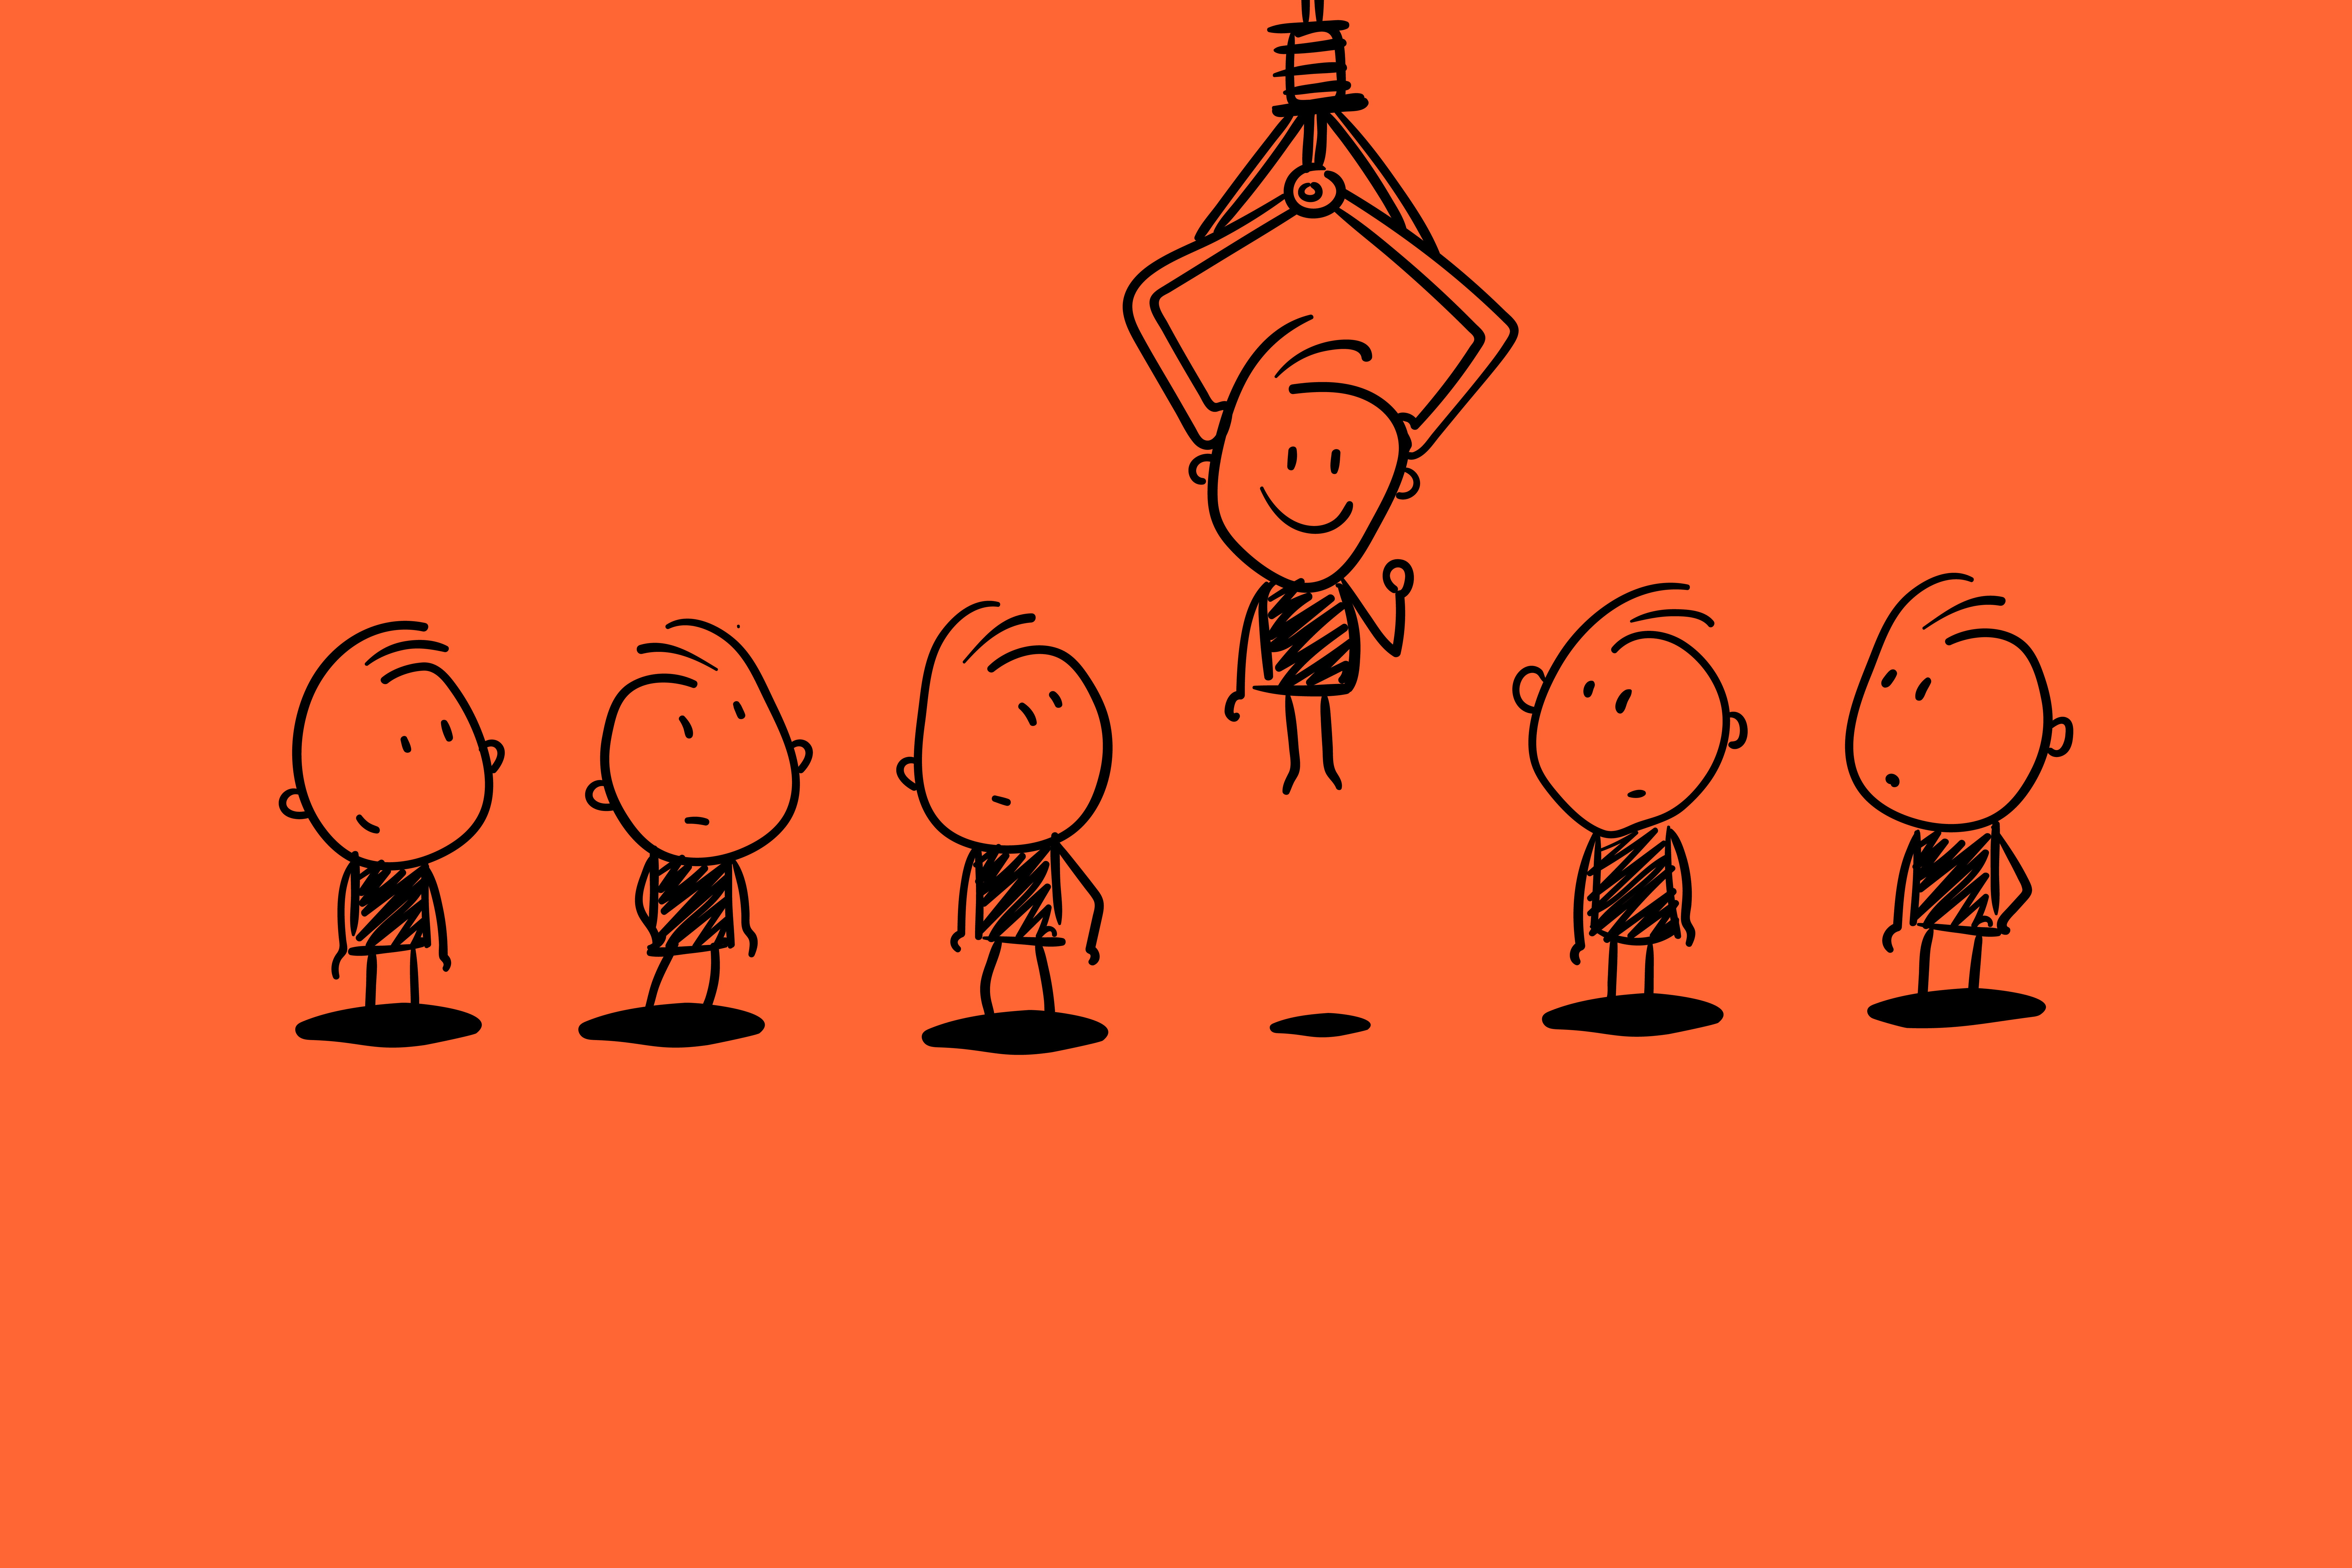 A group of stick figures stands in a row, looking up at one stick figure who is hanging upside down from a clamp, seemingly cheerful and different from the rest. It's as if they've chosen